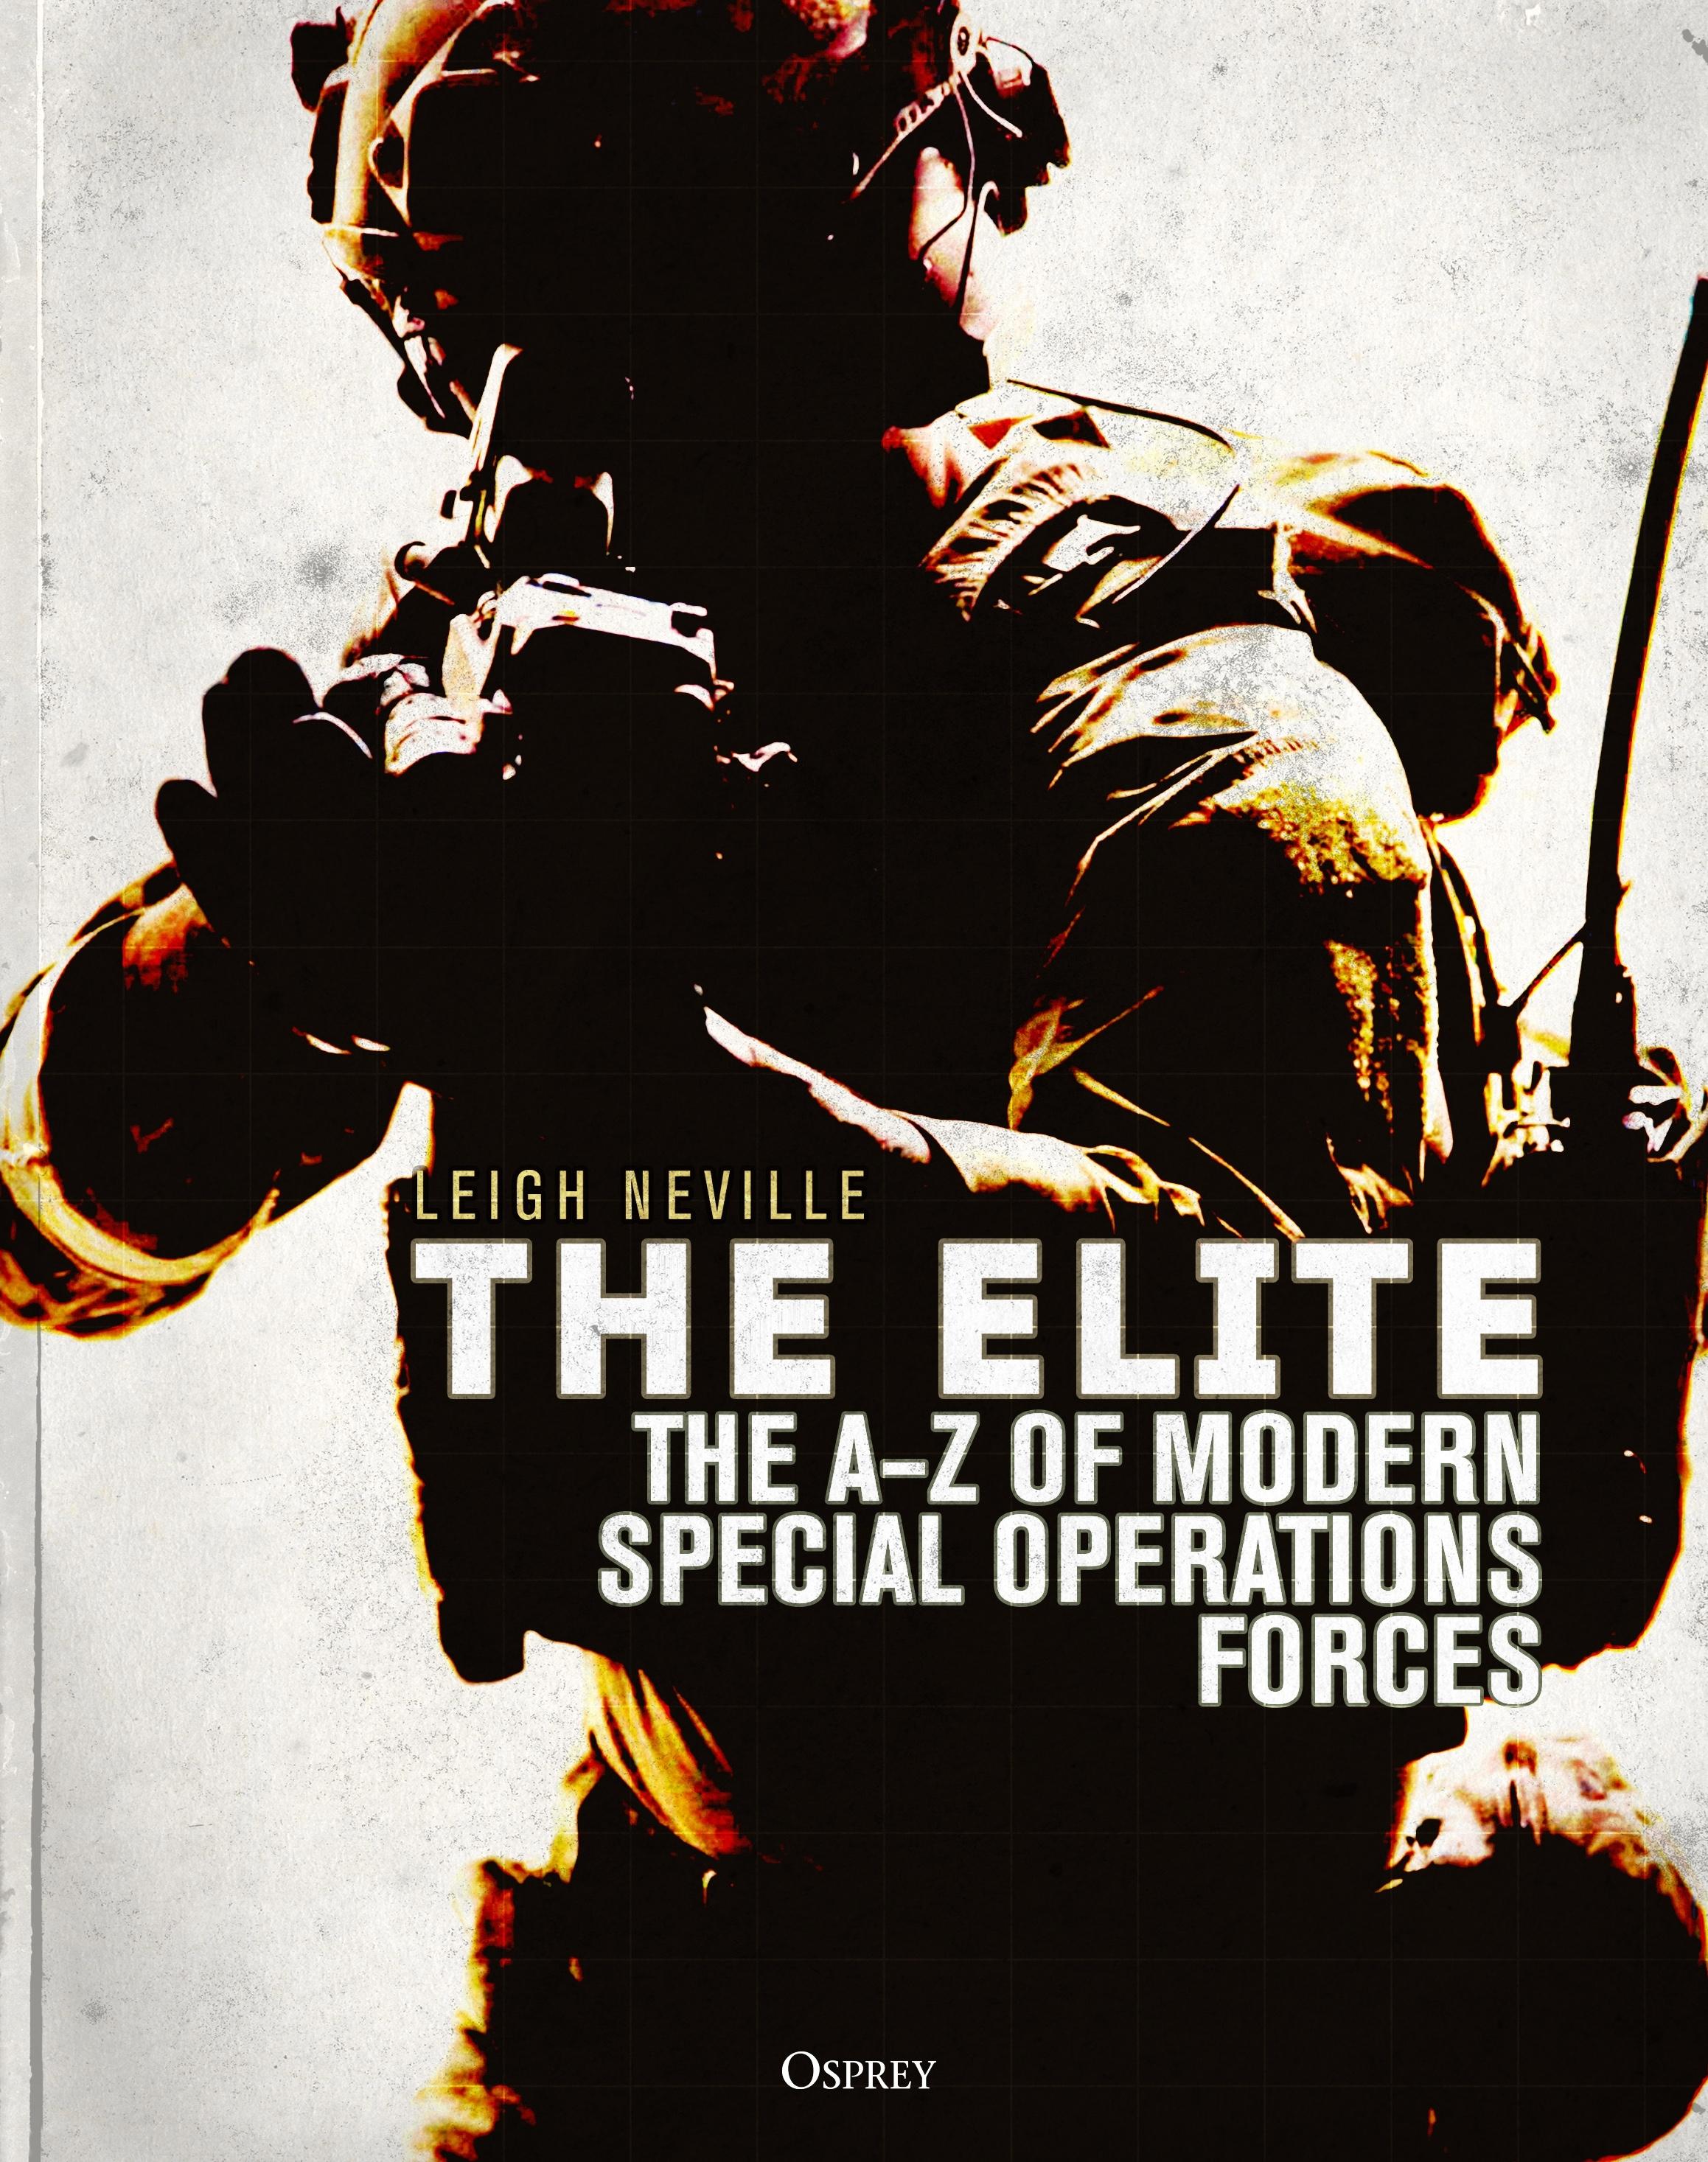 The Elite / The A-Z of Modern Special Operations Forces / Leigh Neville / Buch / Gebunden / Englisch / 2019 / Bloomsbury Publishing PLC / EAN 9781472824295 - Neville, Leigh